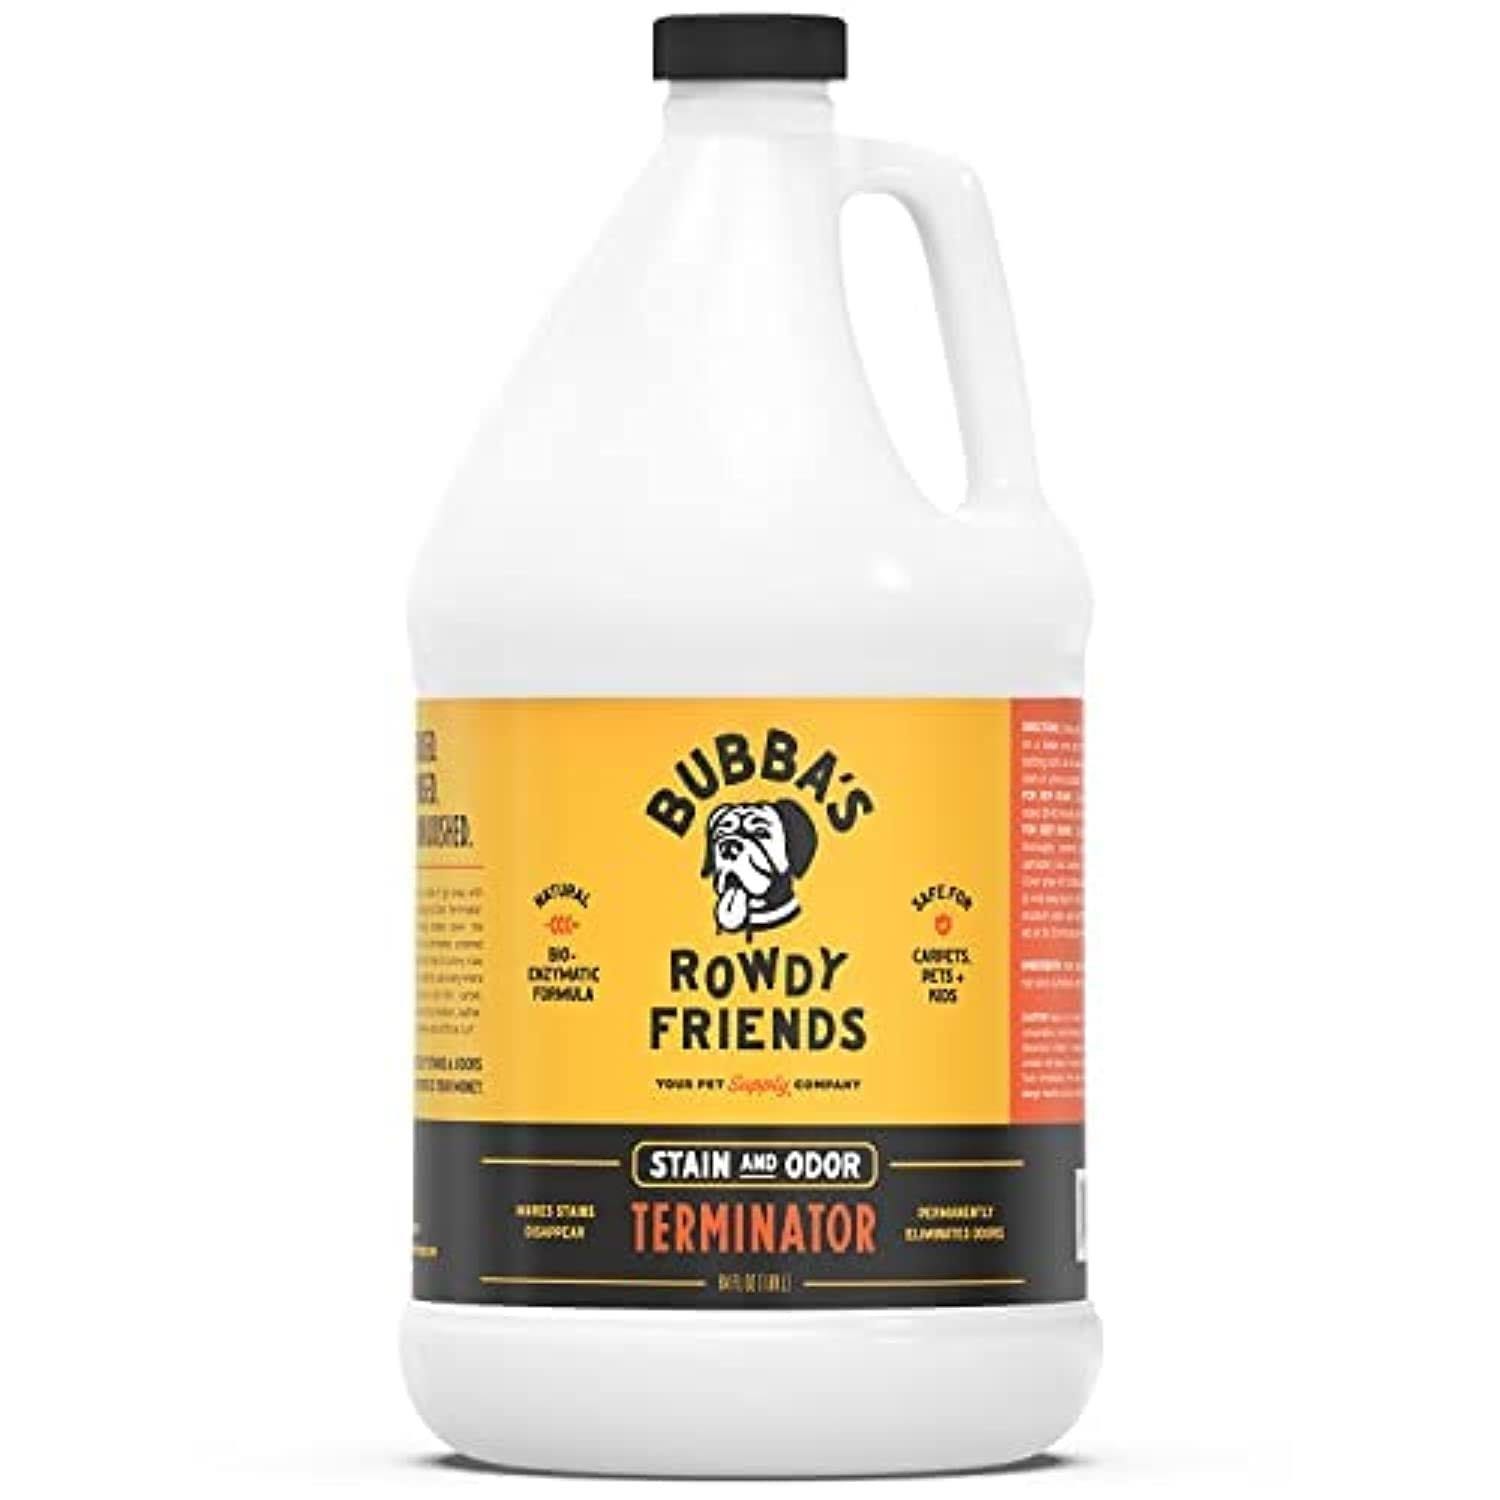 Bubba's Rowdy Friends Commercial Enzyme Cleaner for Pet Odor Elimination | Image